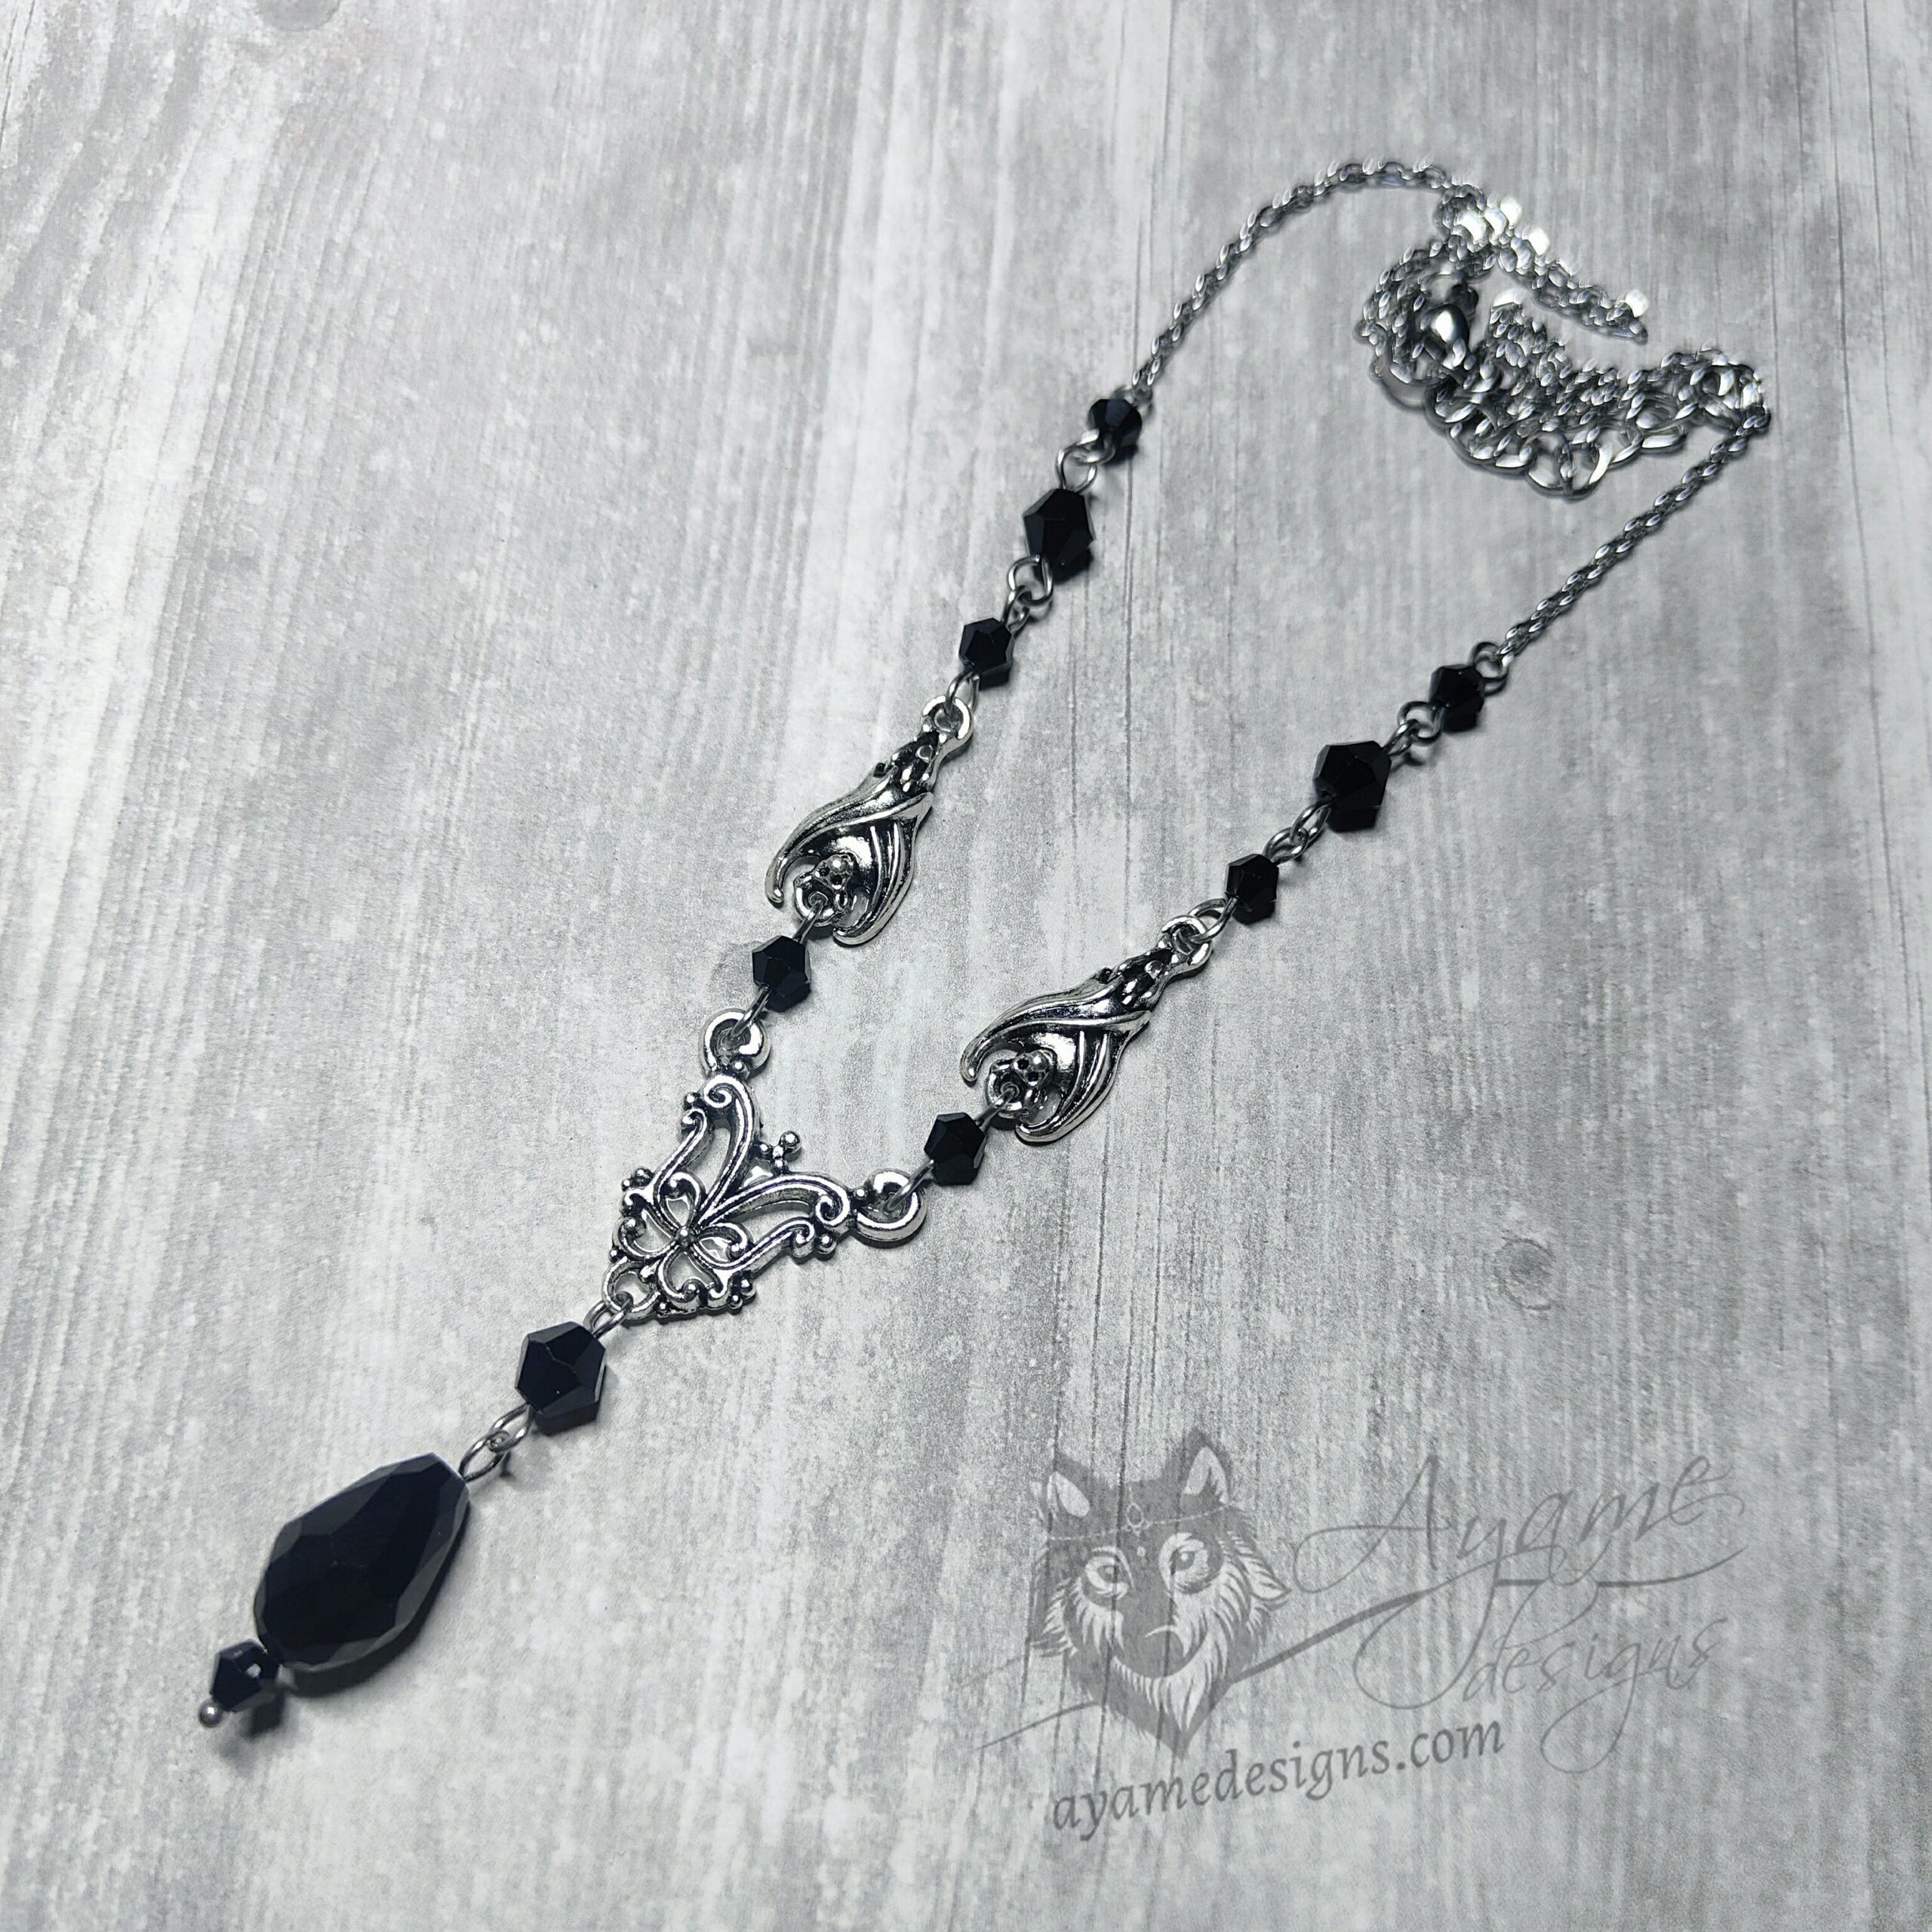 Adjustable gothic necklace with small bat and filigree charms, with black Austrian crystal beads and stainless steel chain